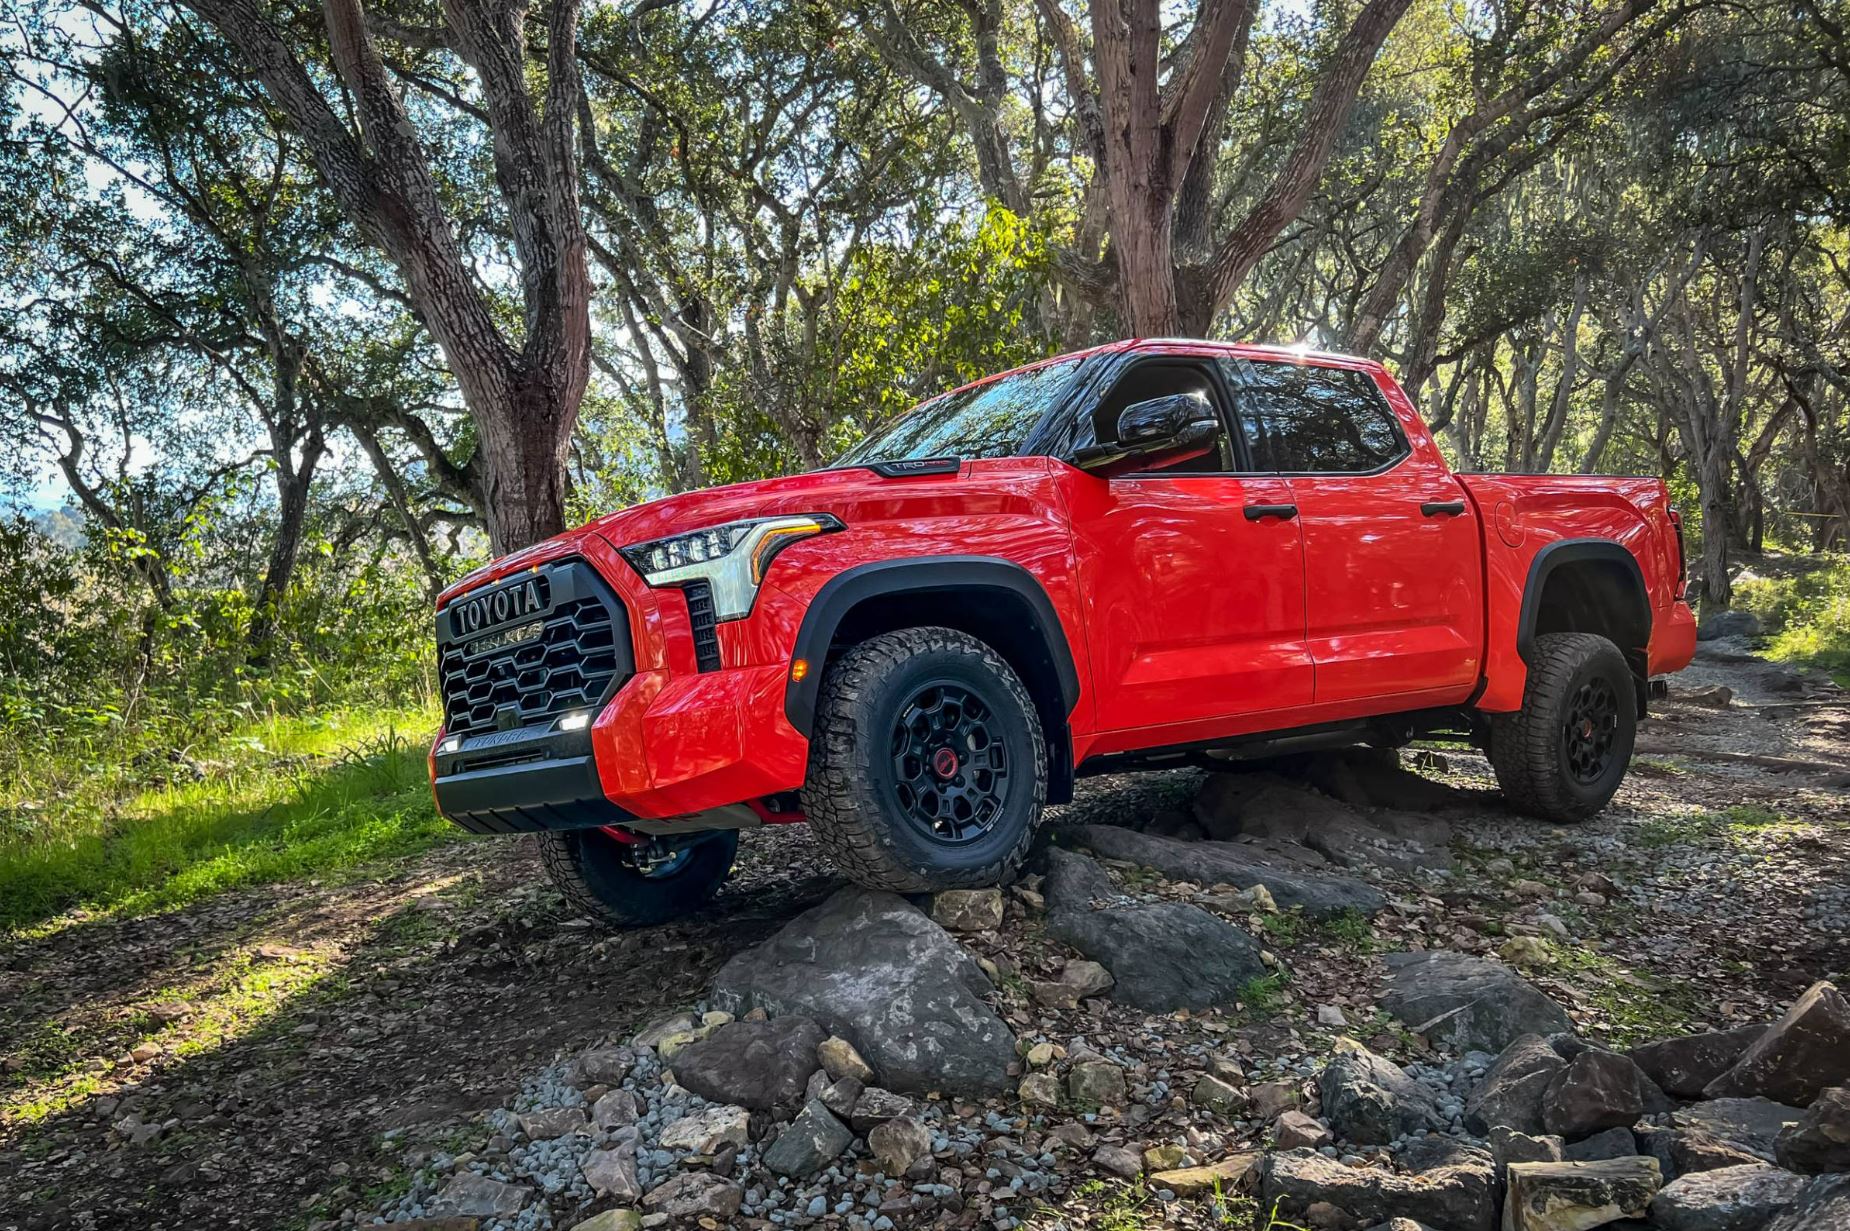 The Toyota Tundra is the Truck to Have This Year